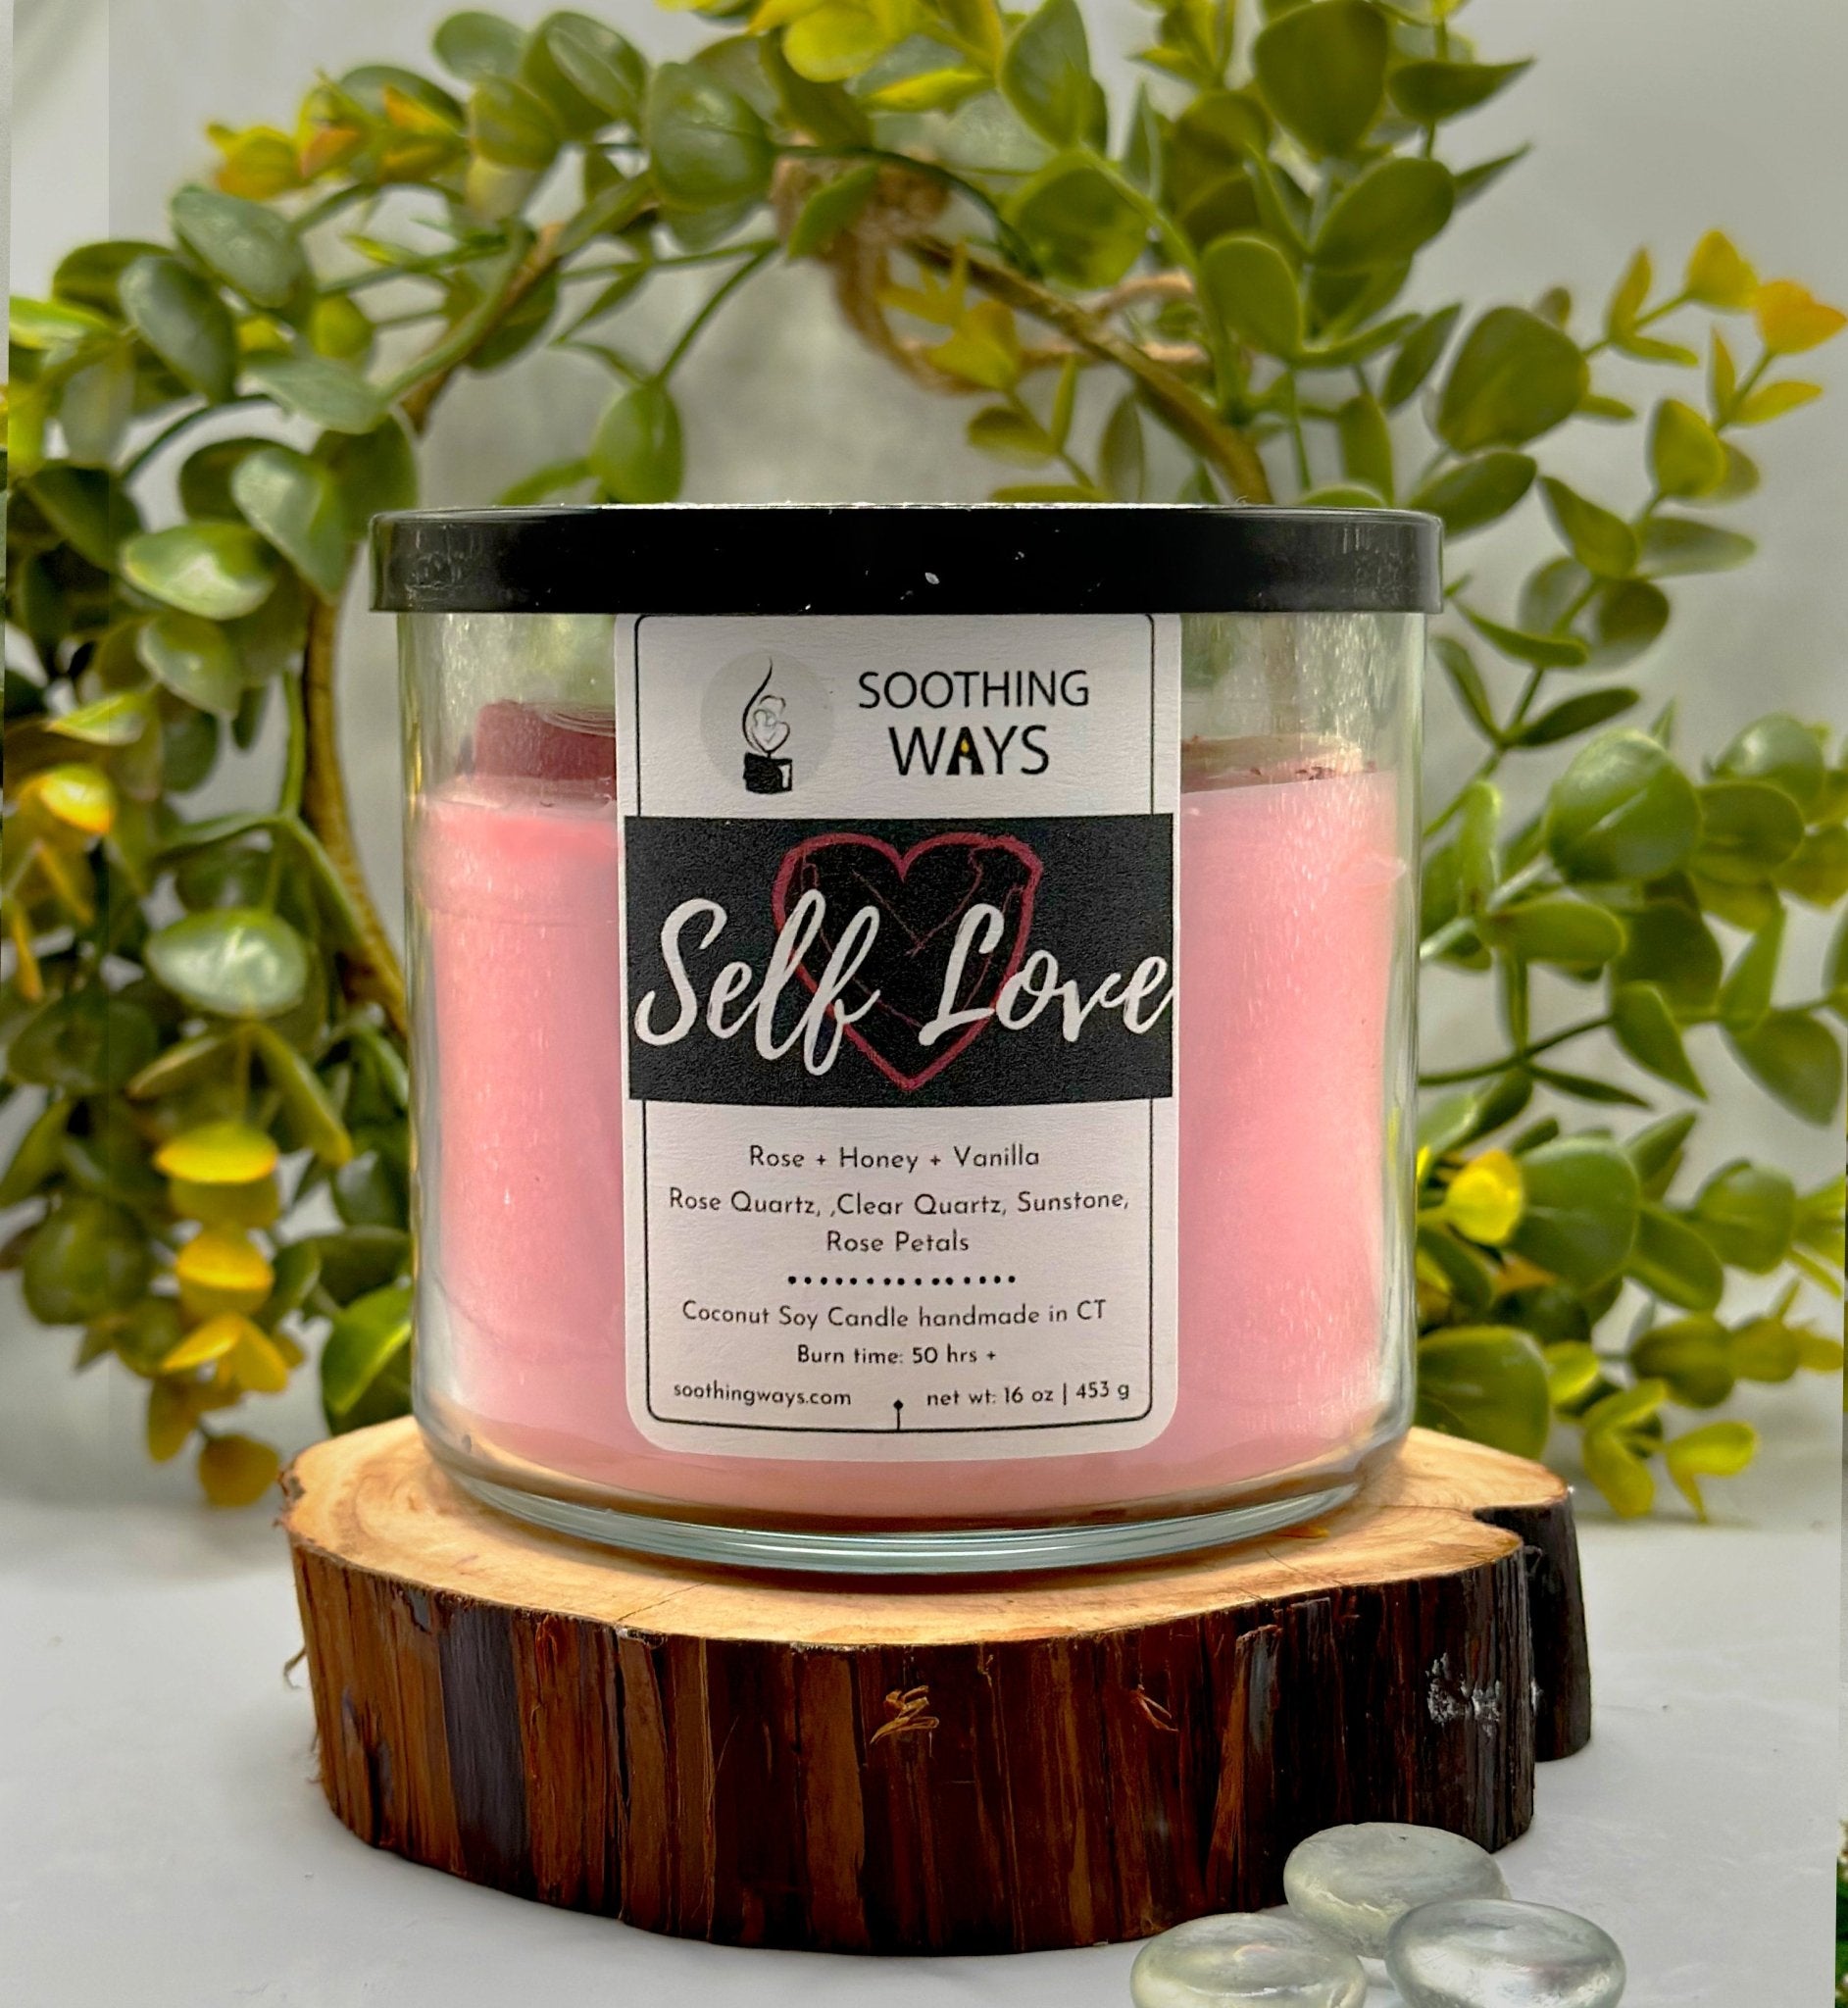 Self Love 16 oz candle - Soothing Ways